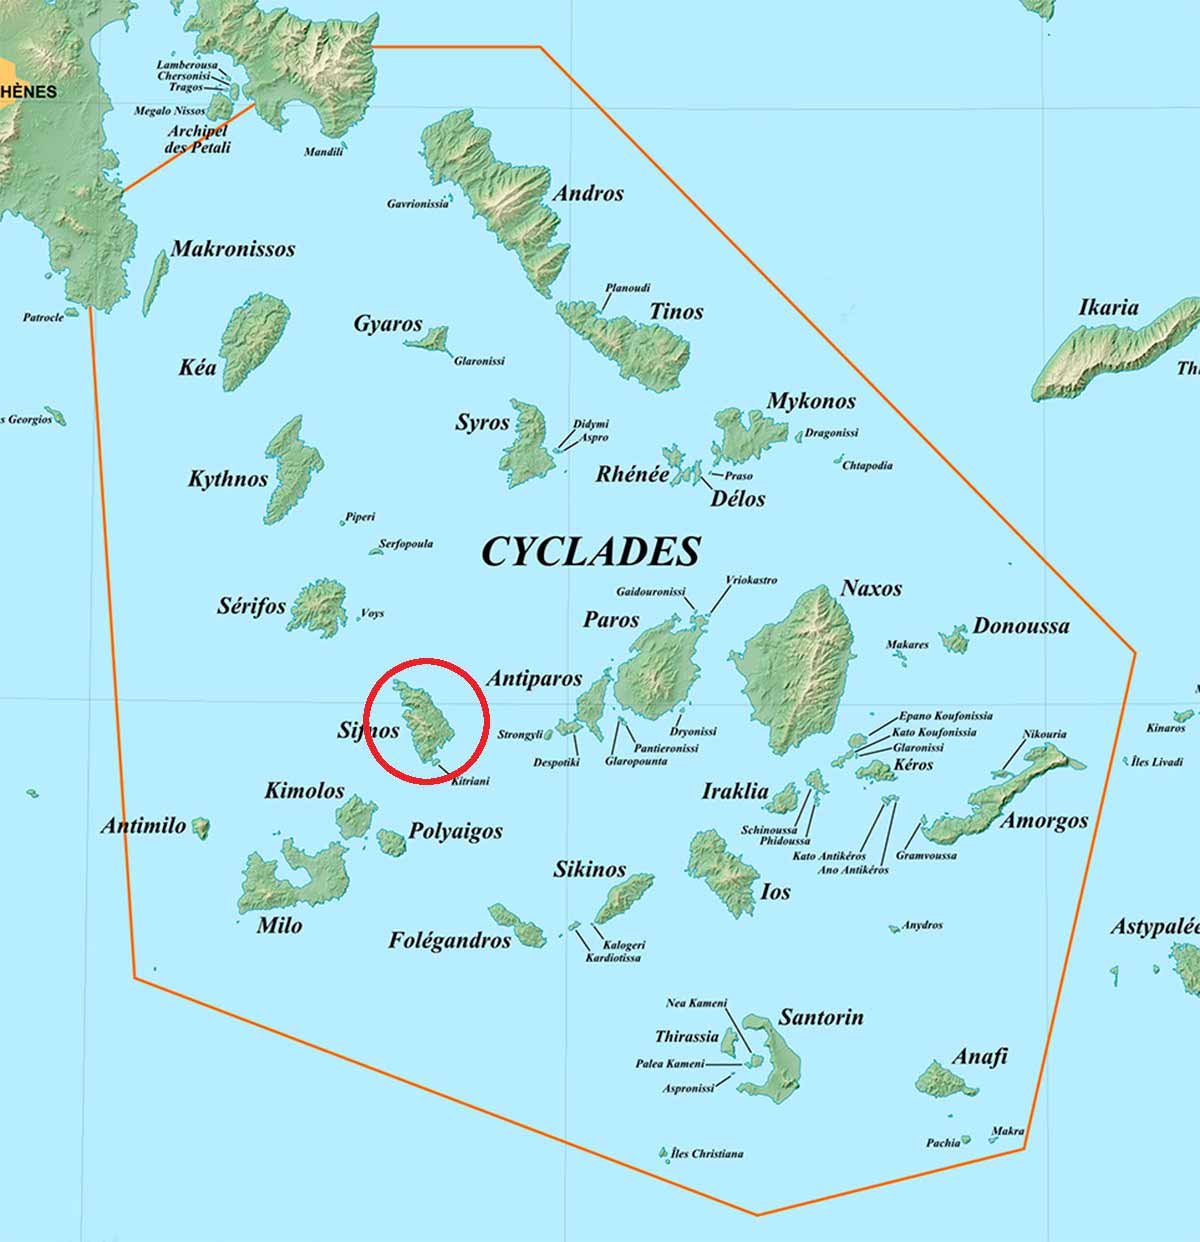 Cyclades map and the location of Sifnos